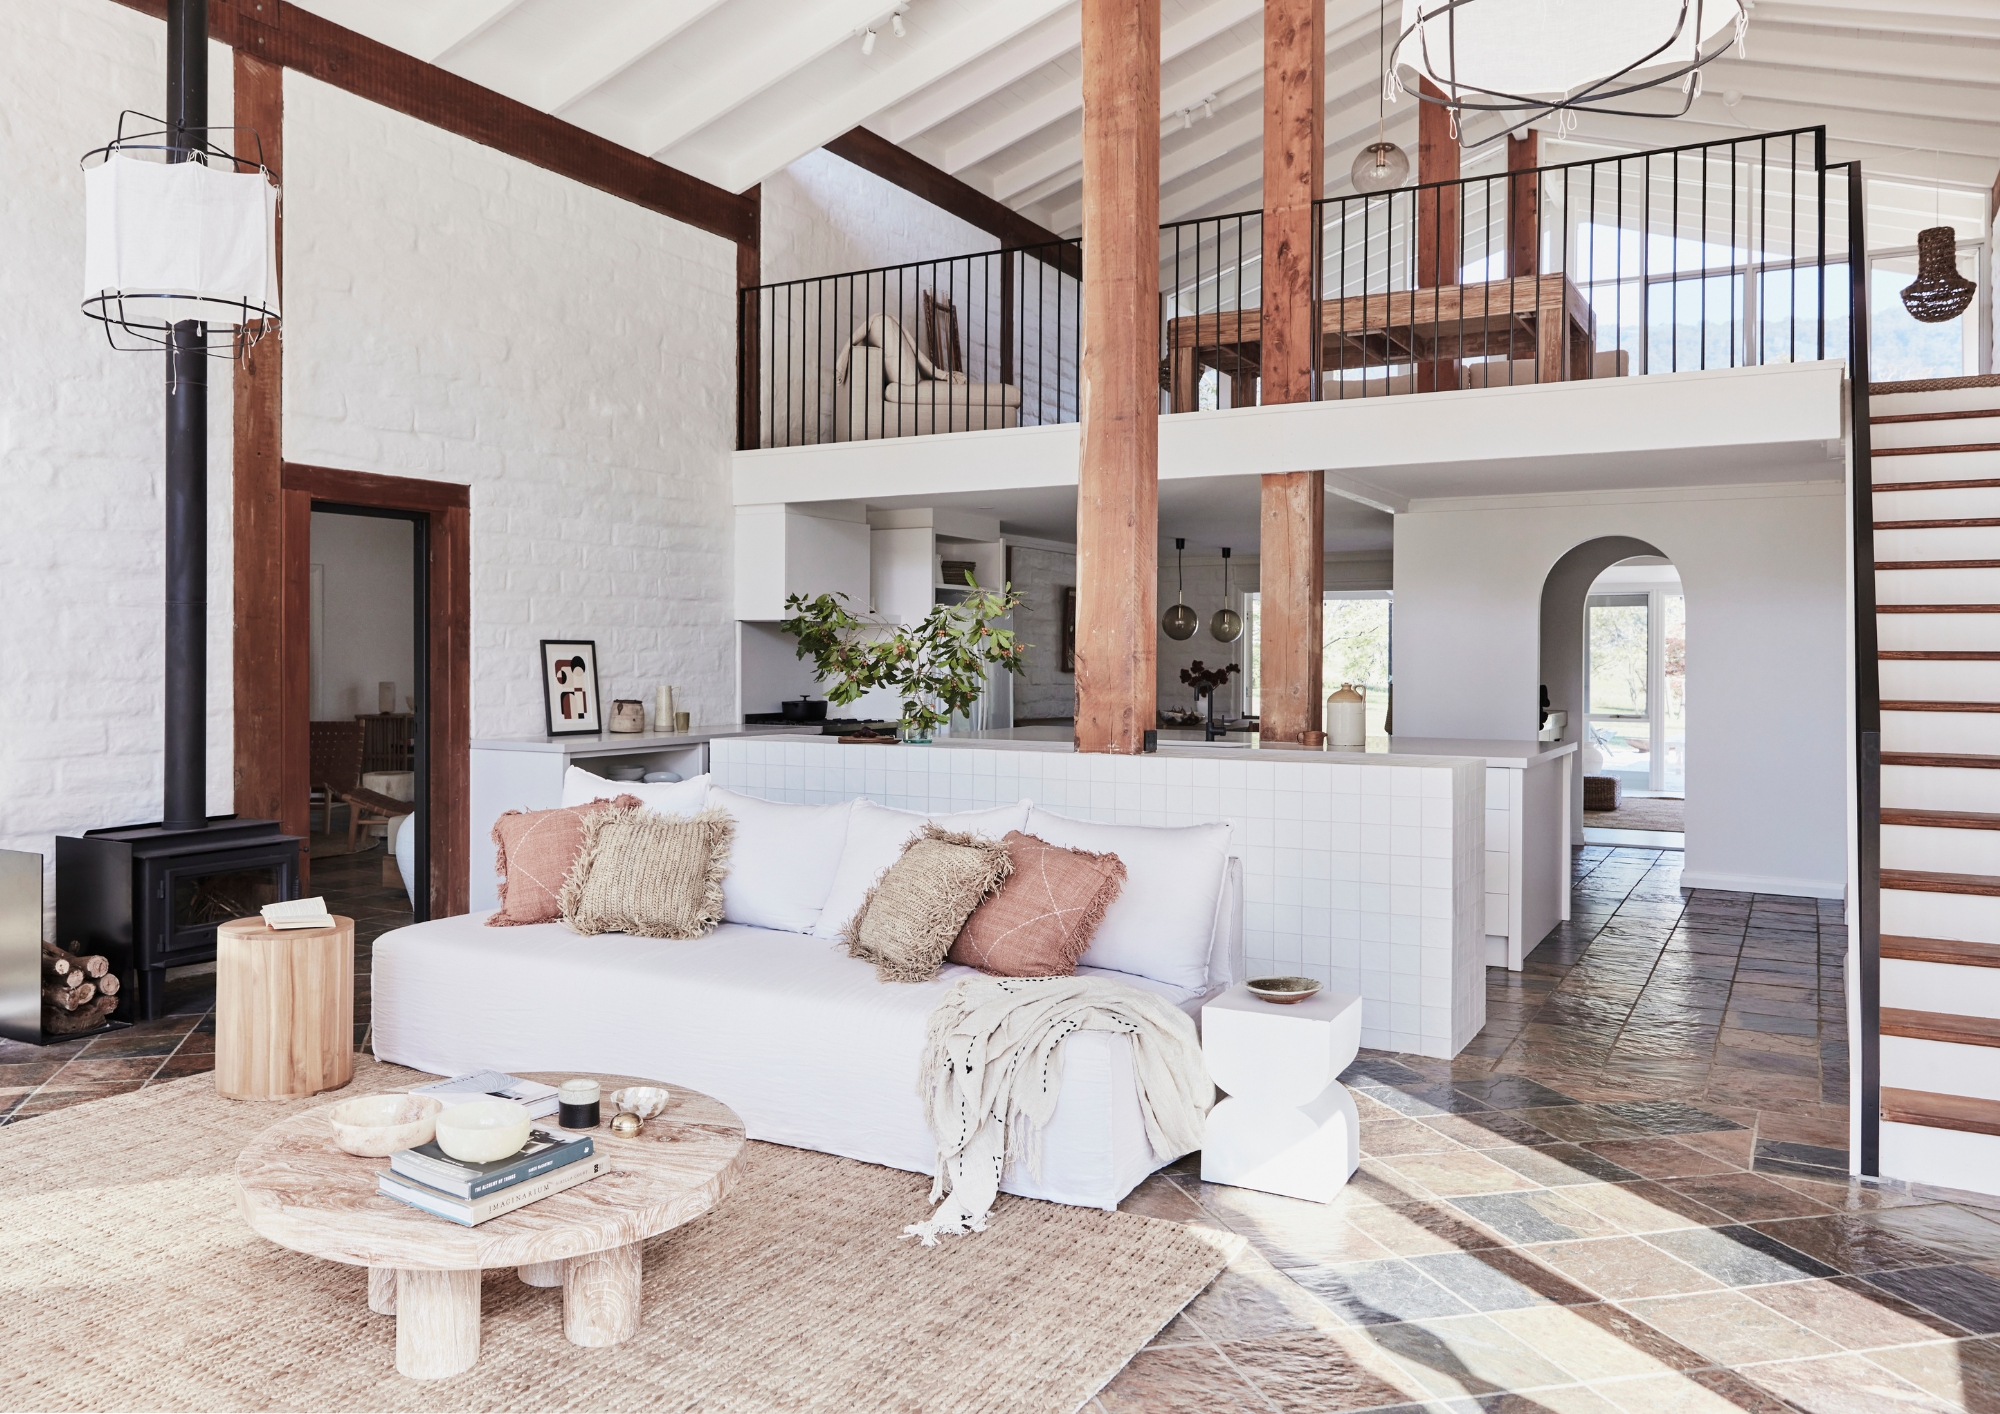 Transform Your Loft: Step-by-Step Guide on How to Decorate a Loft